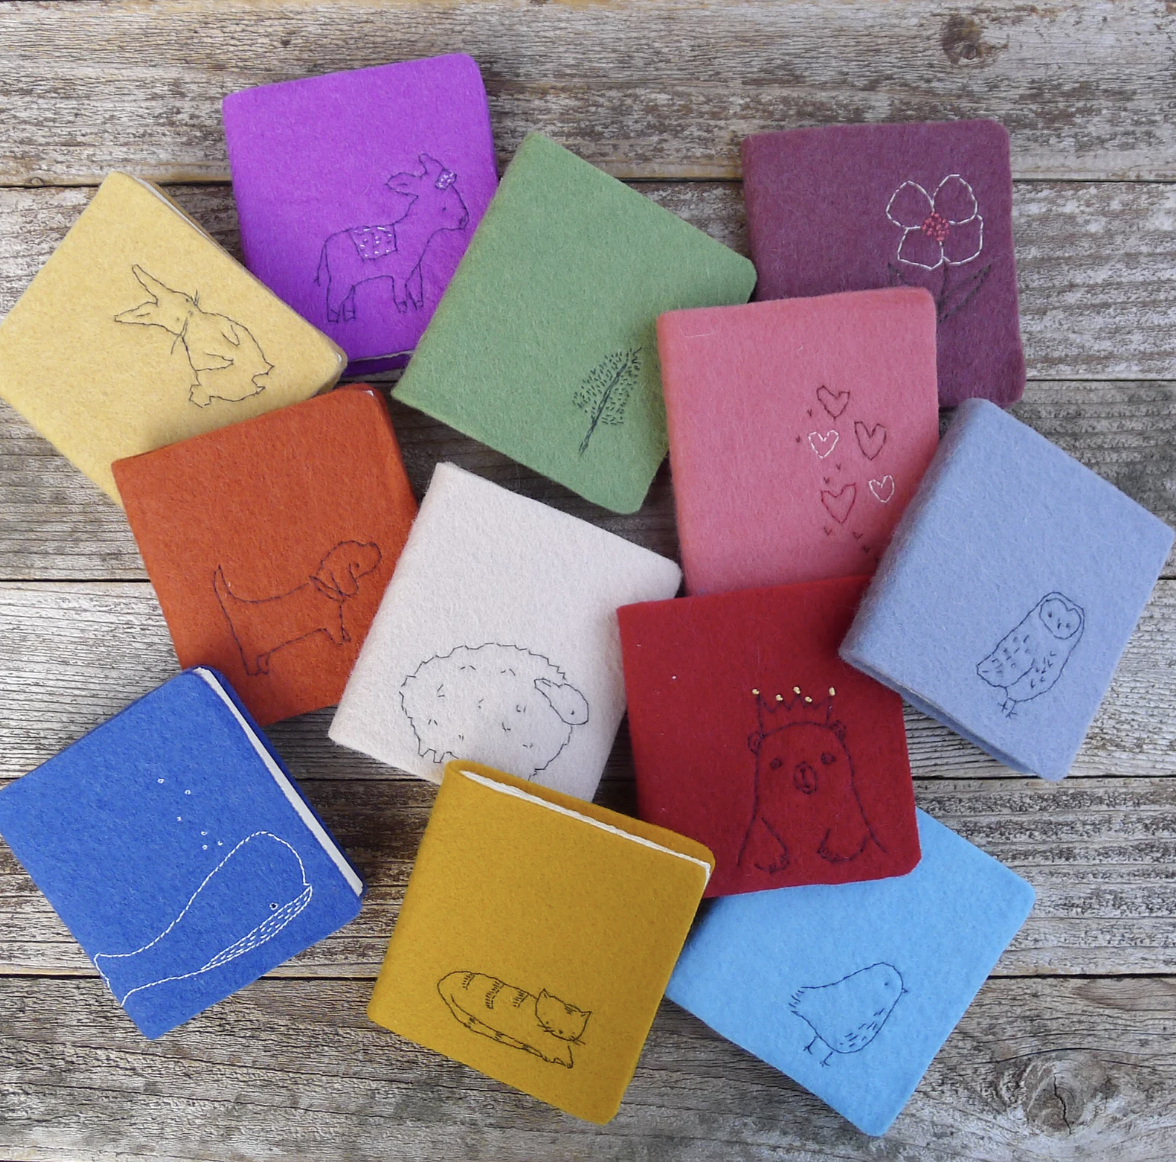 Image of a bunch of colorful mini-journals covered in wool with minimalist embroidered animal designs